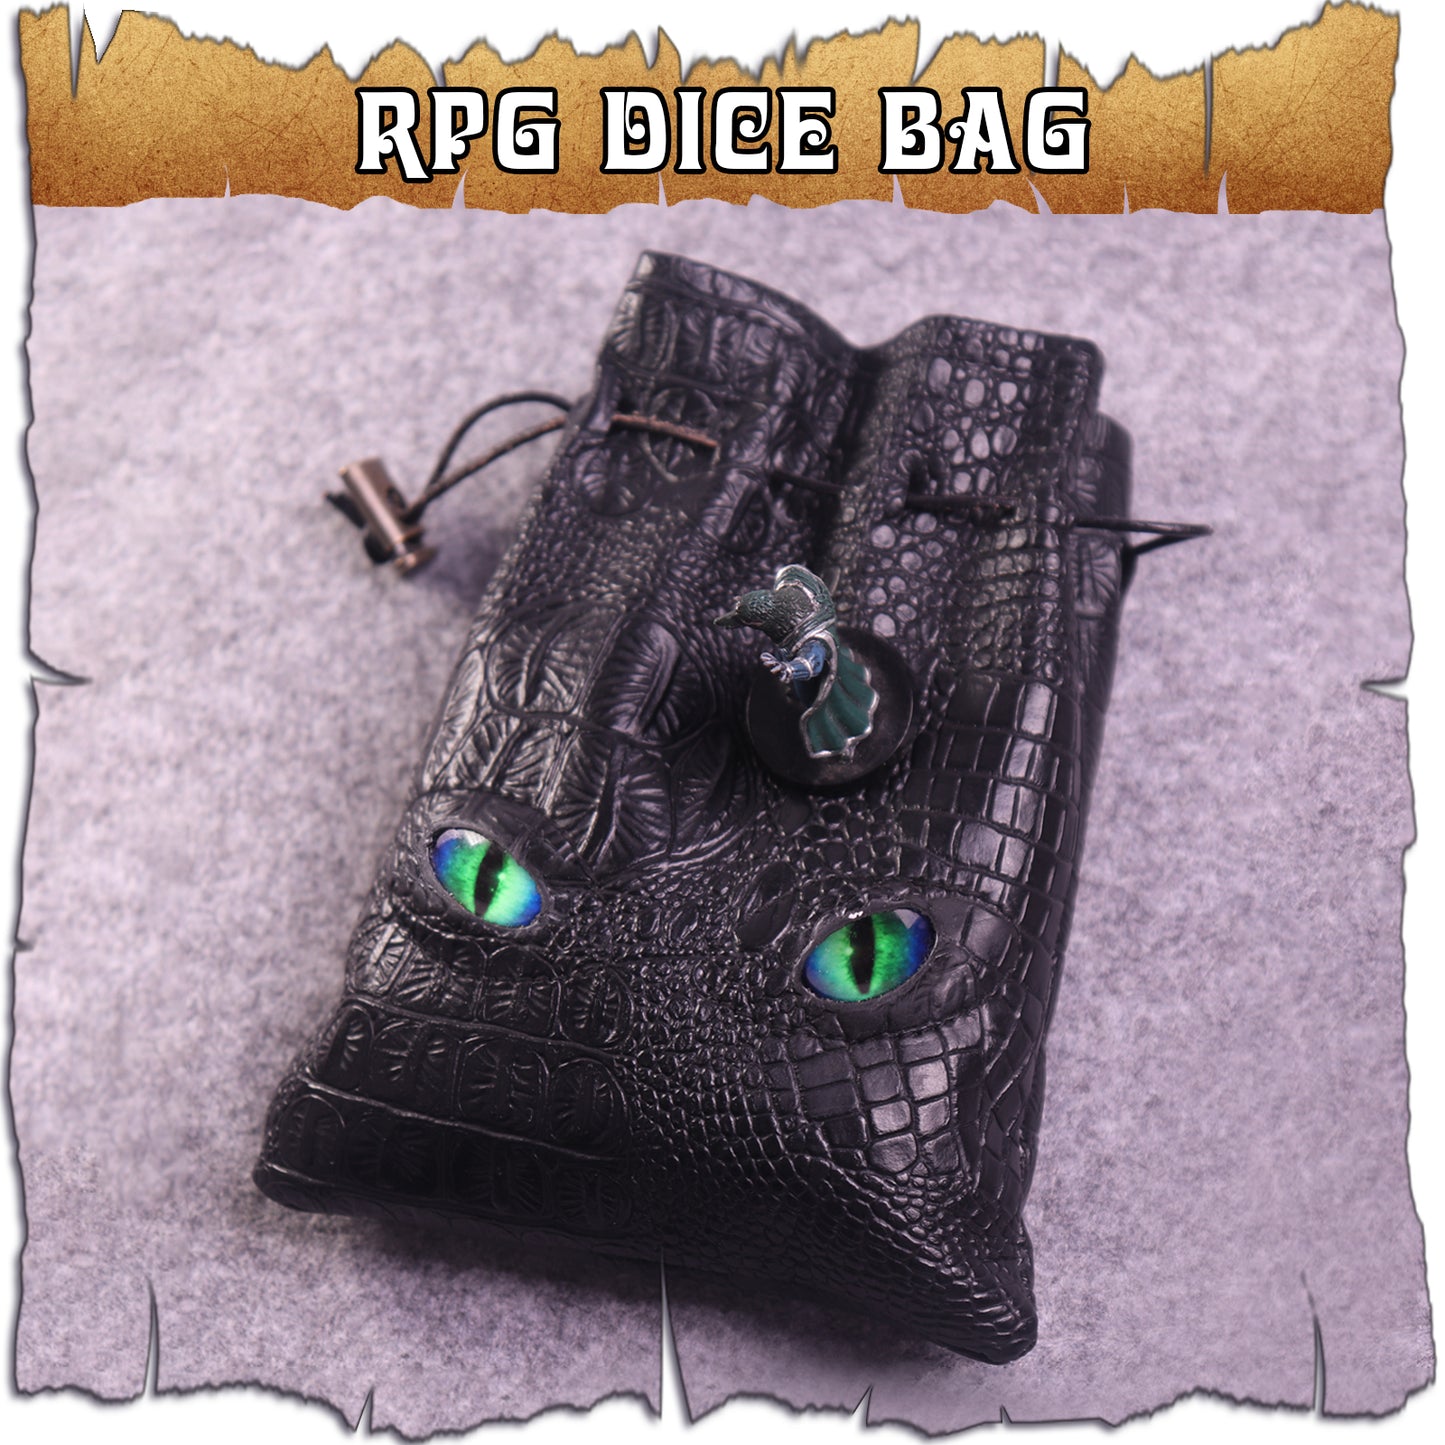 Large DND Dice Bag, Black DND Dice Bag can Hold 6 DND Dice Sets, Fire Dragon Leather Coin Bag, Glows Green Light in Eyes, Suitable for DND Board Games, Fantasy RPG Game Accessories, Dice Not Included